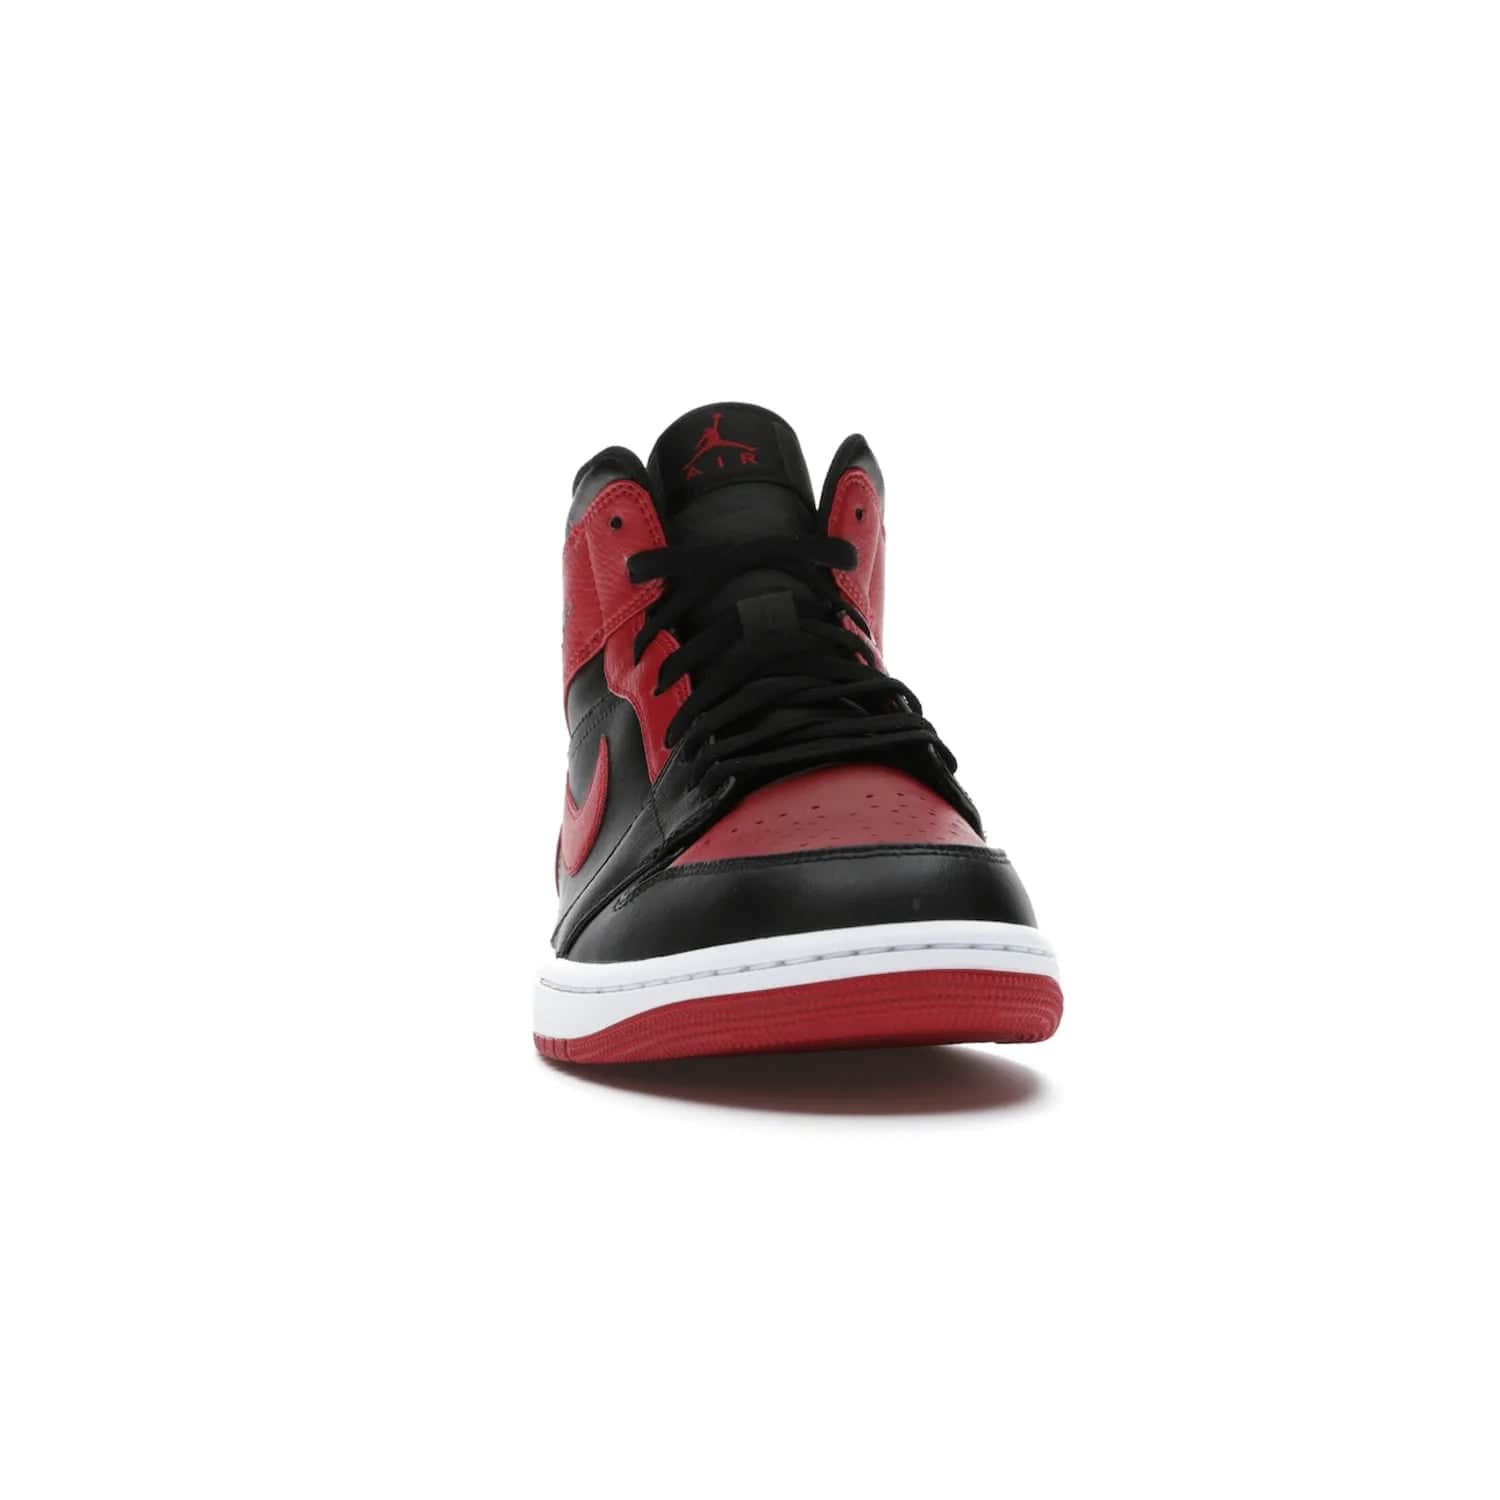 Jordan 1 Mid Banned (2020) - Image 9 - Only at www.BallersClubKickz.com - The Air Jordan 1 Mid Banned (2020) brings a modern twist to the classic Banned colorway. Features full-grain black and red leather uppers, red leather around the toe, collar, heel, & Swoosh. Release November 2021 for $110.